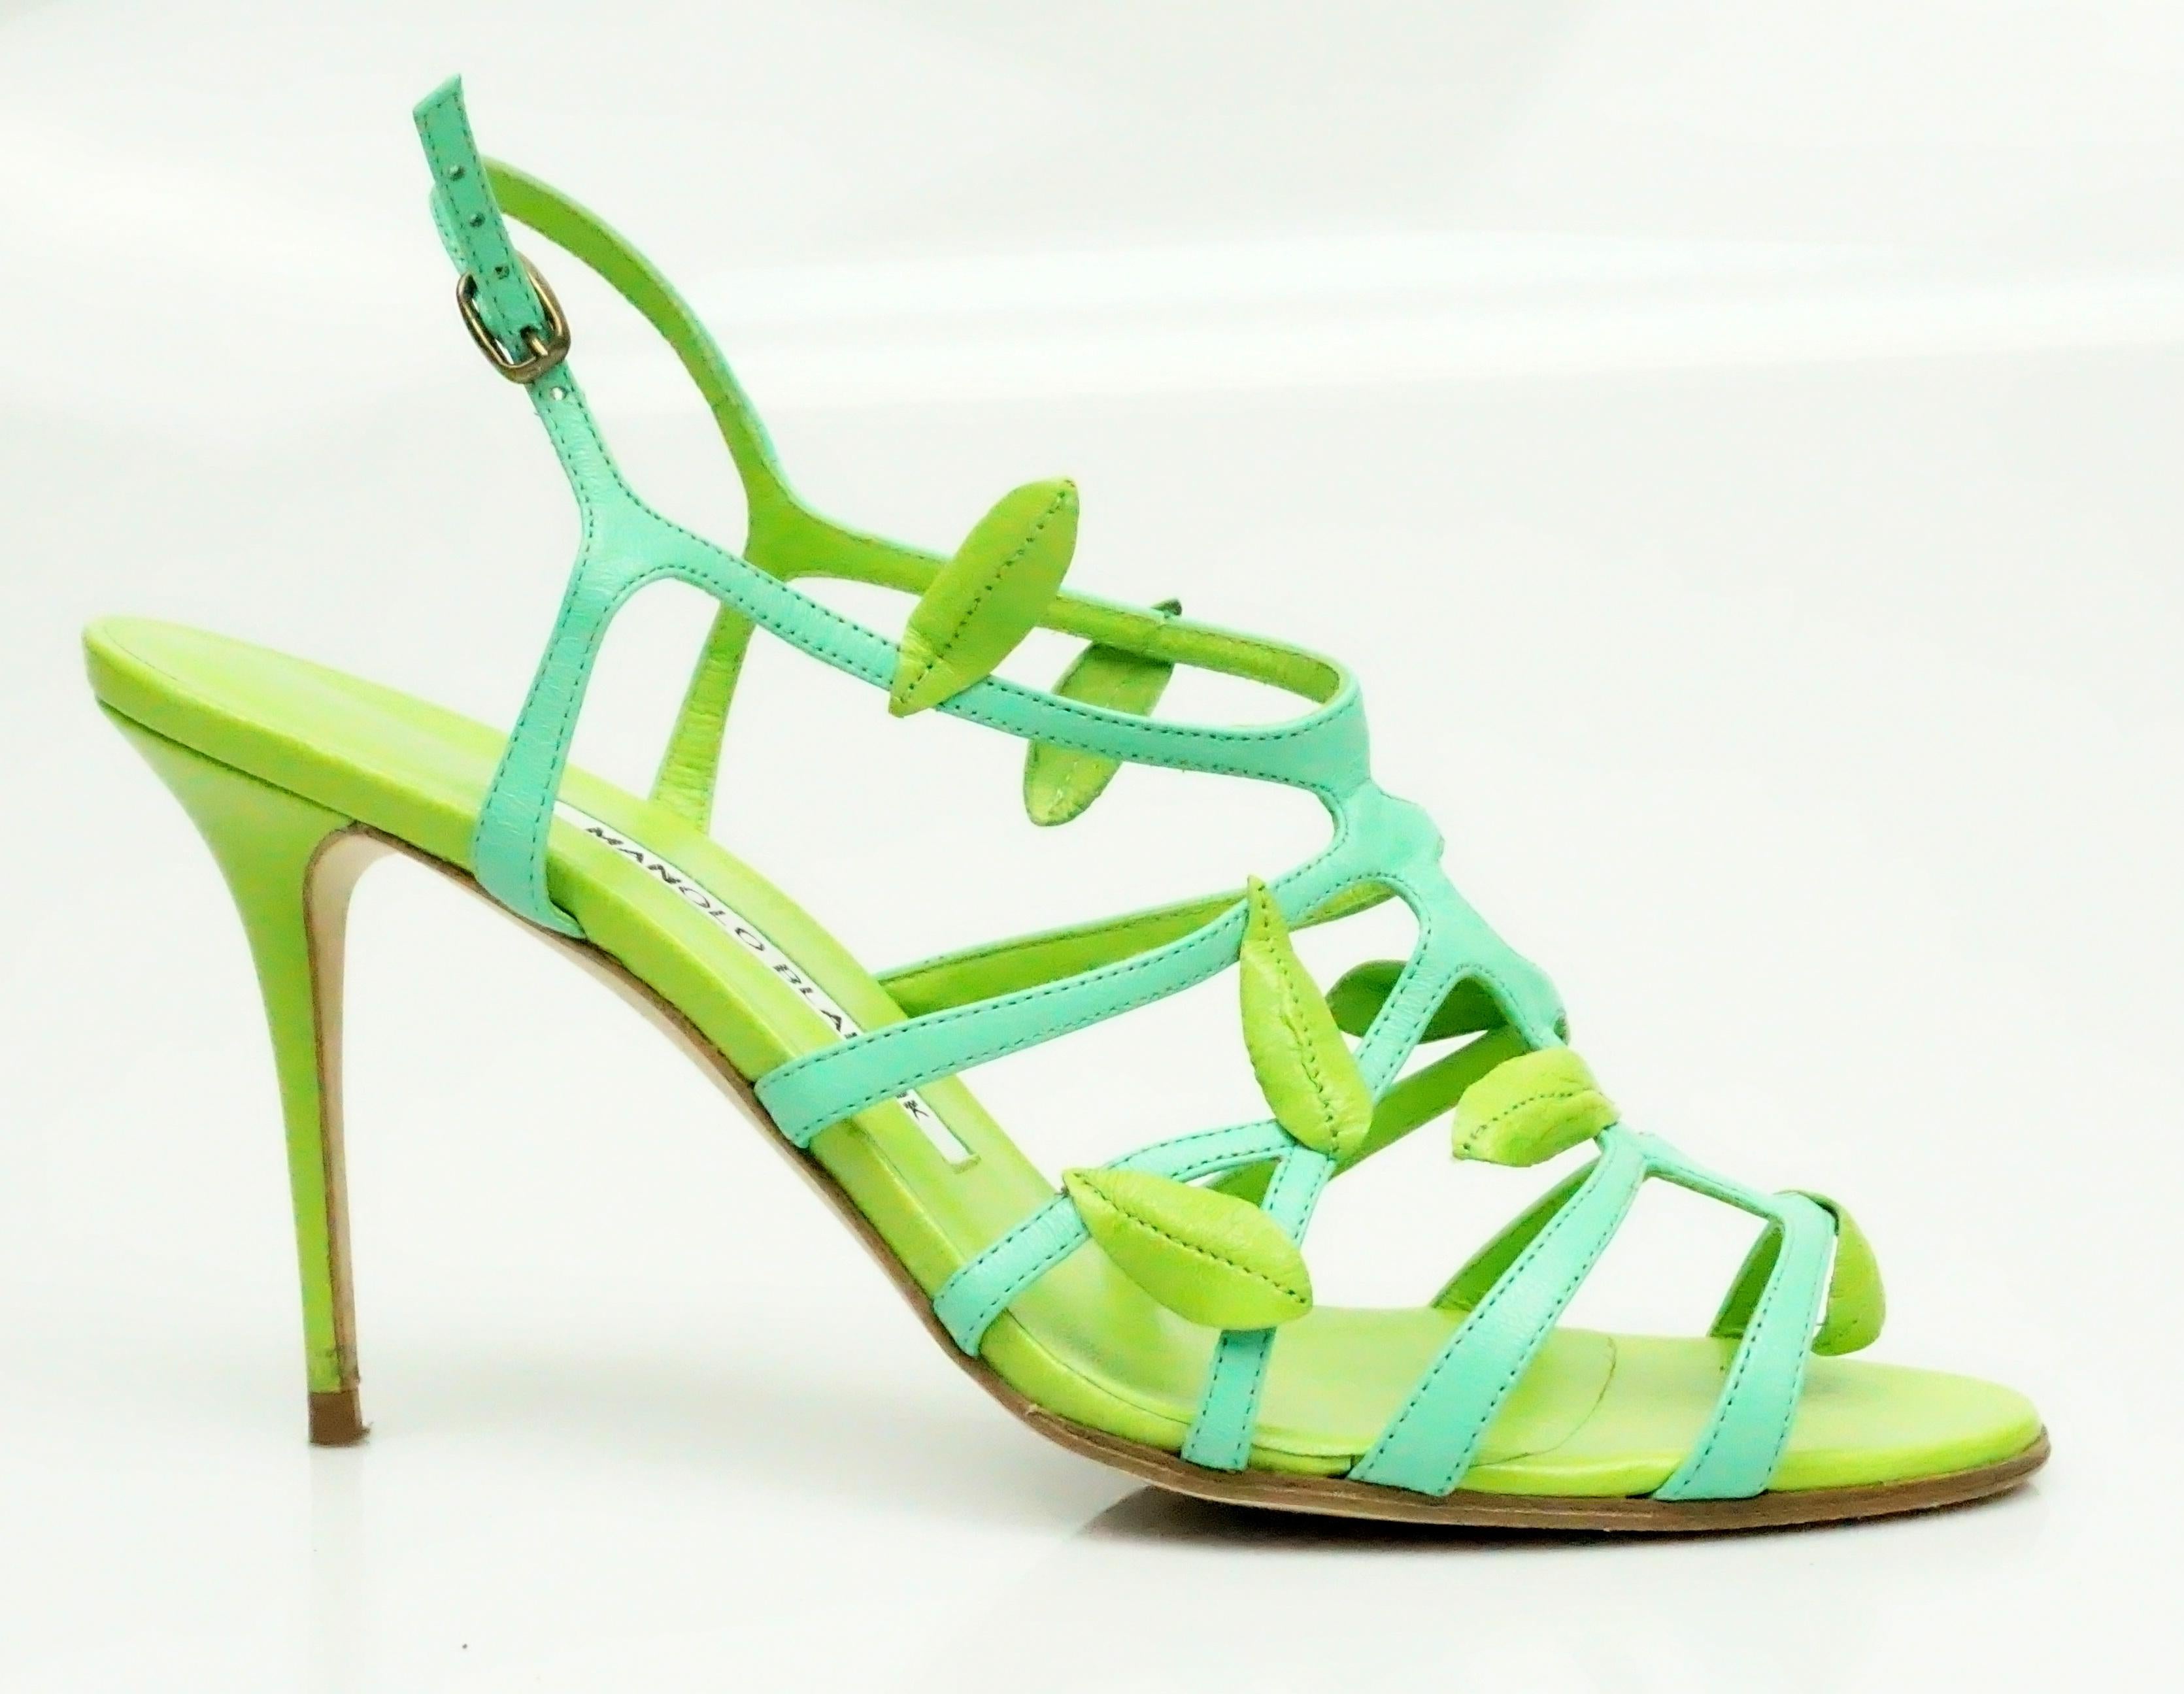 Manolo Blahnik Green Strappy Sandal Heel w/ Leaf Detail - 37  These Beautiful and unique shoes are in excellent condition. They are made of a leather material and are two different colors, green and turquoise. There is a leaf detail throughout the